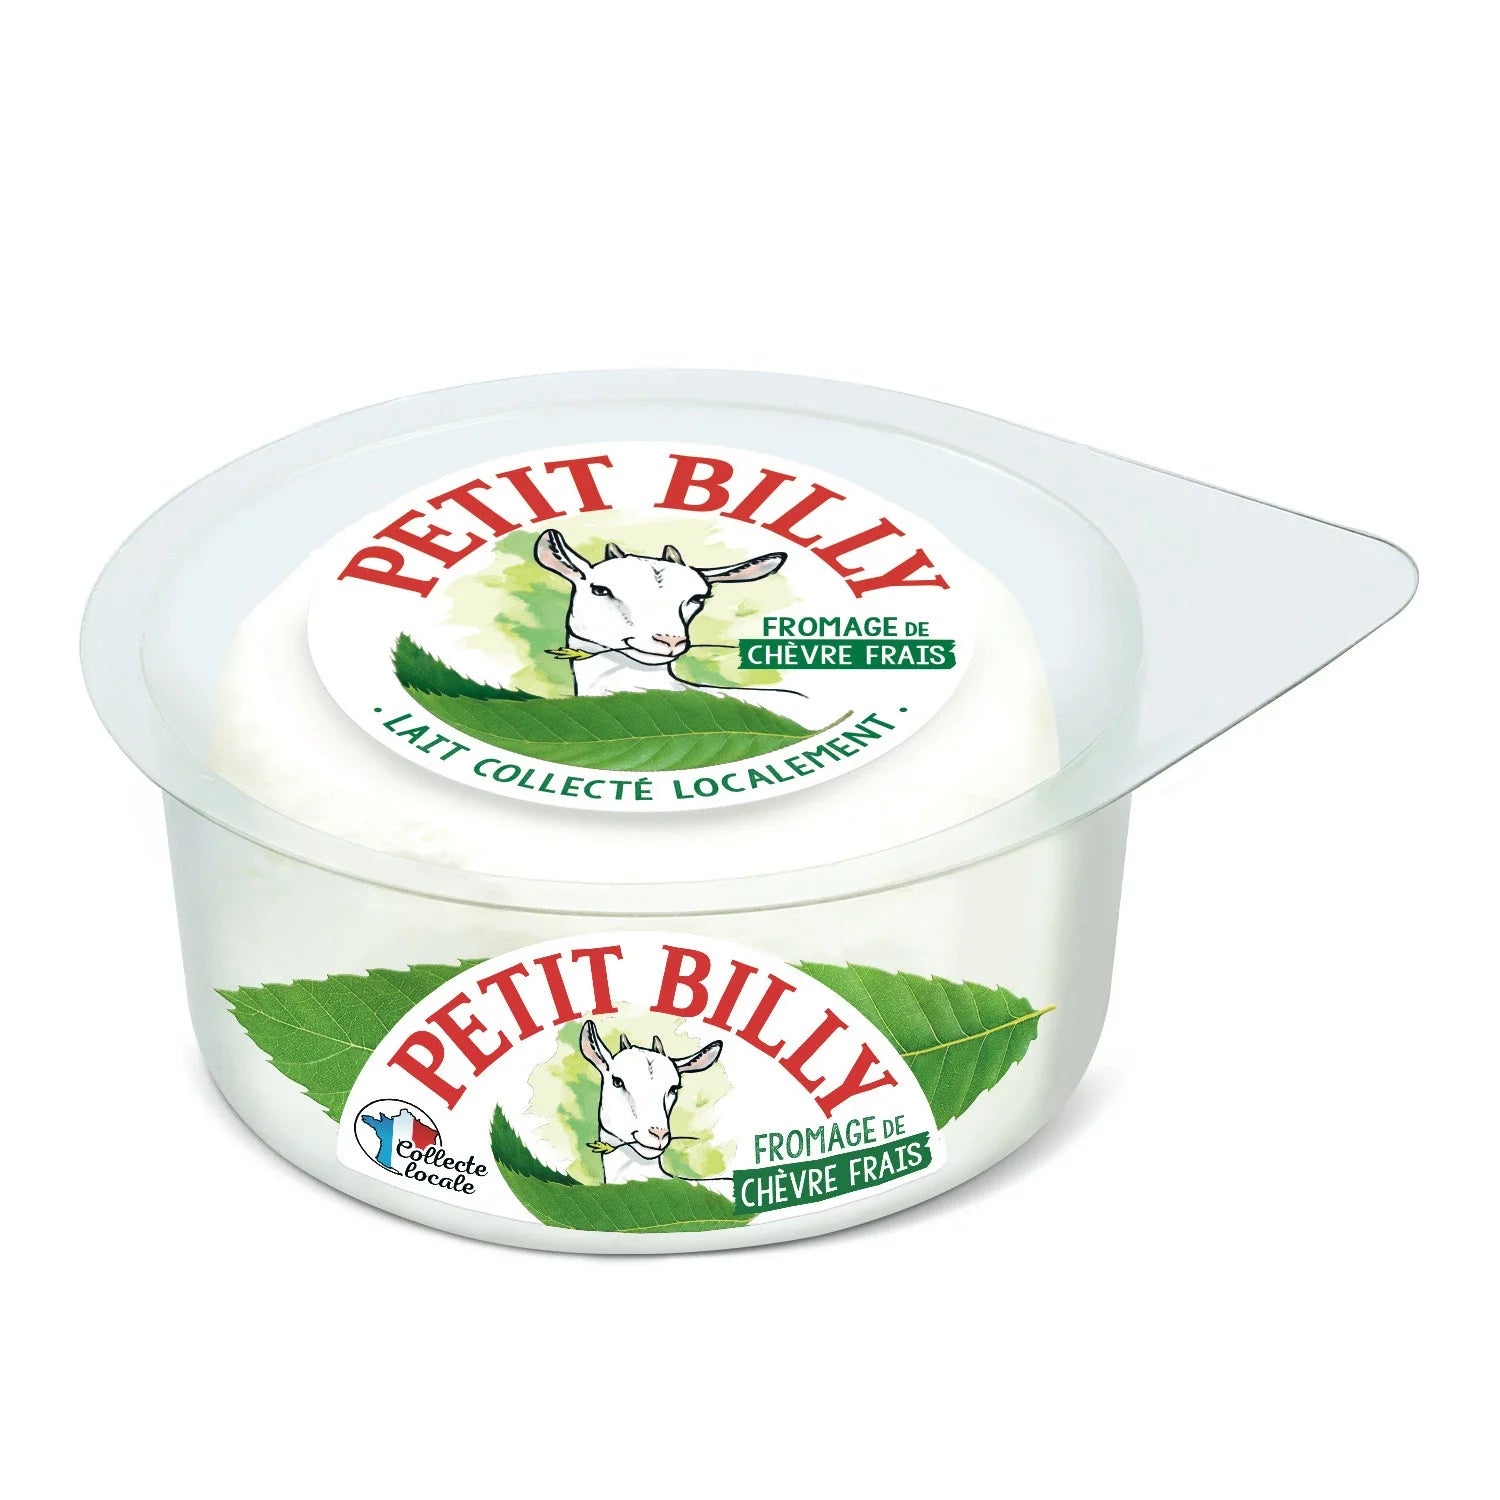 Petit Billy Goat Cheese Fromage frais 200g 6ct